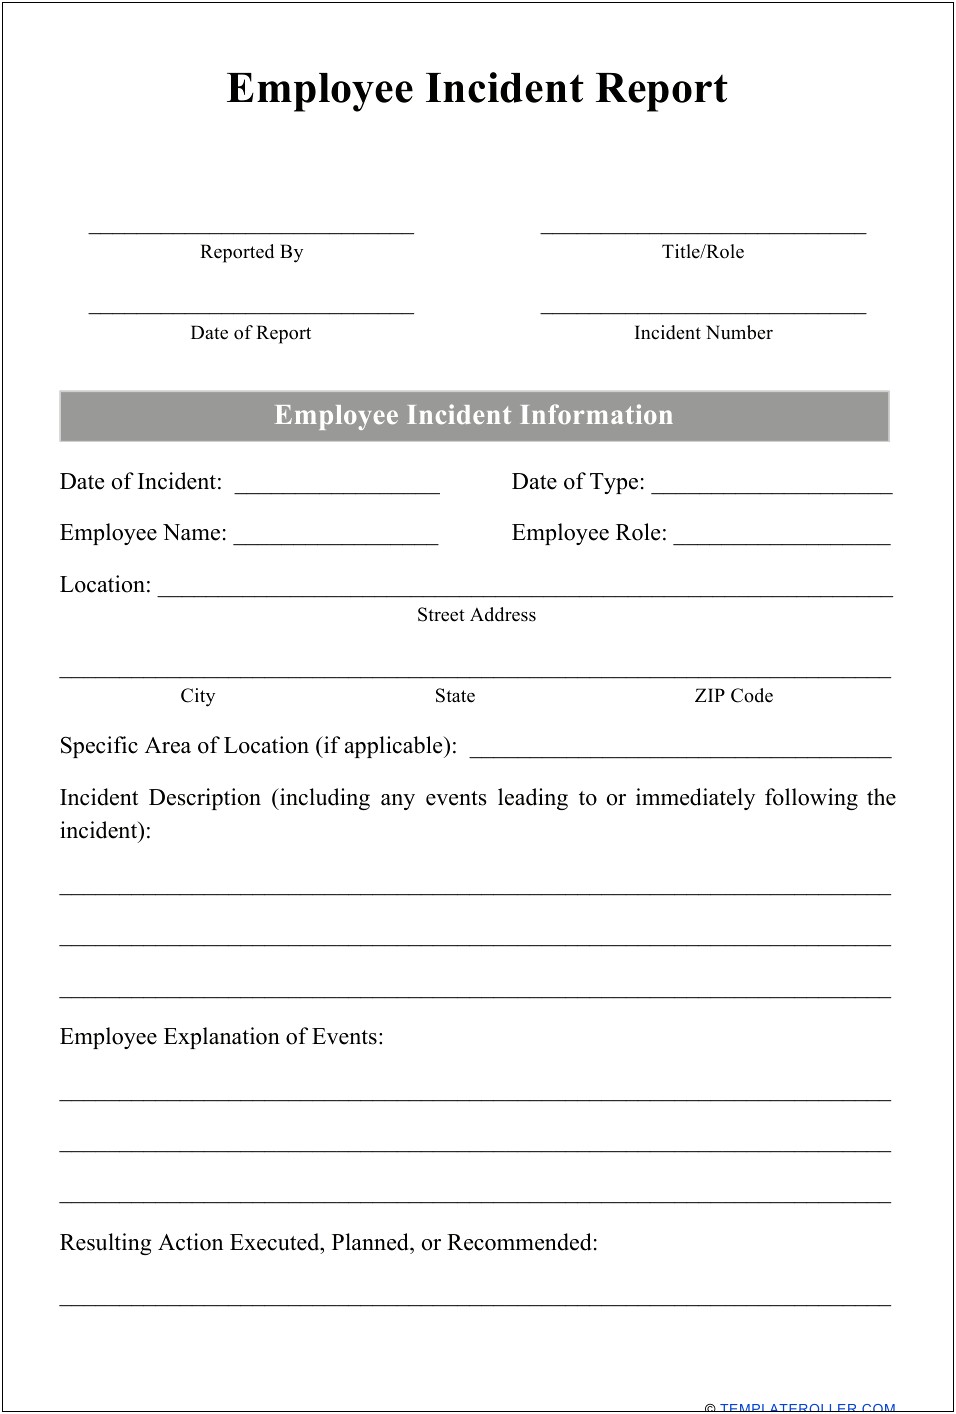 Free Auto Accident Report Form Template